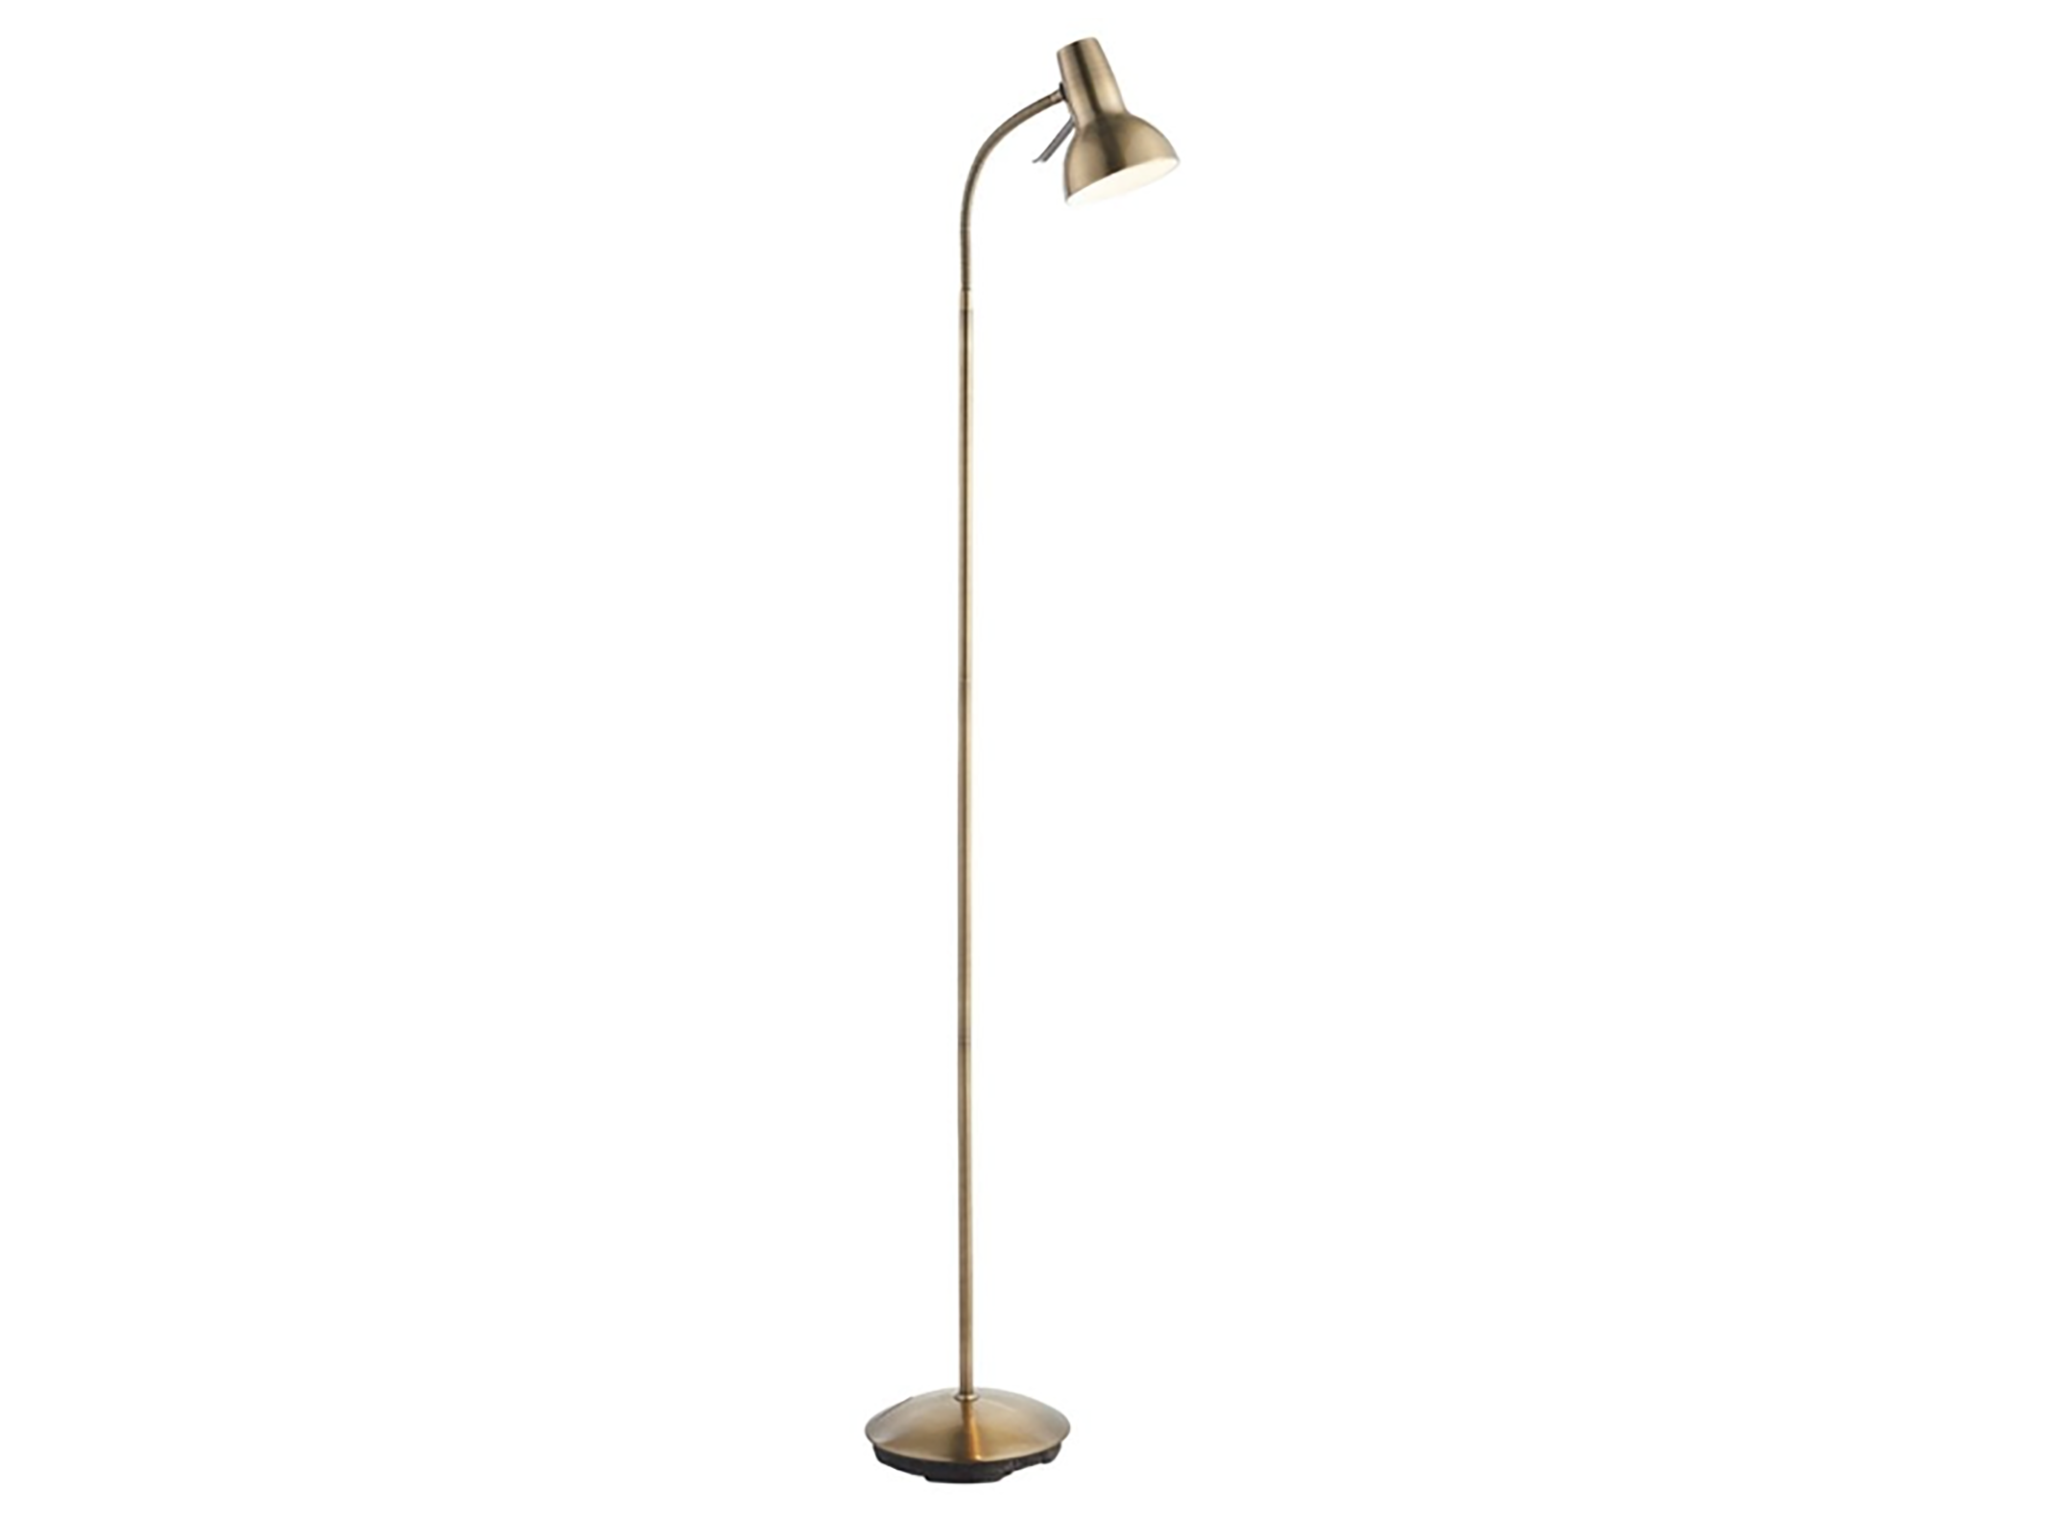 Antique Brass Floor Lamp with Green Shade and Reading Light